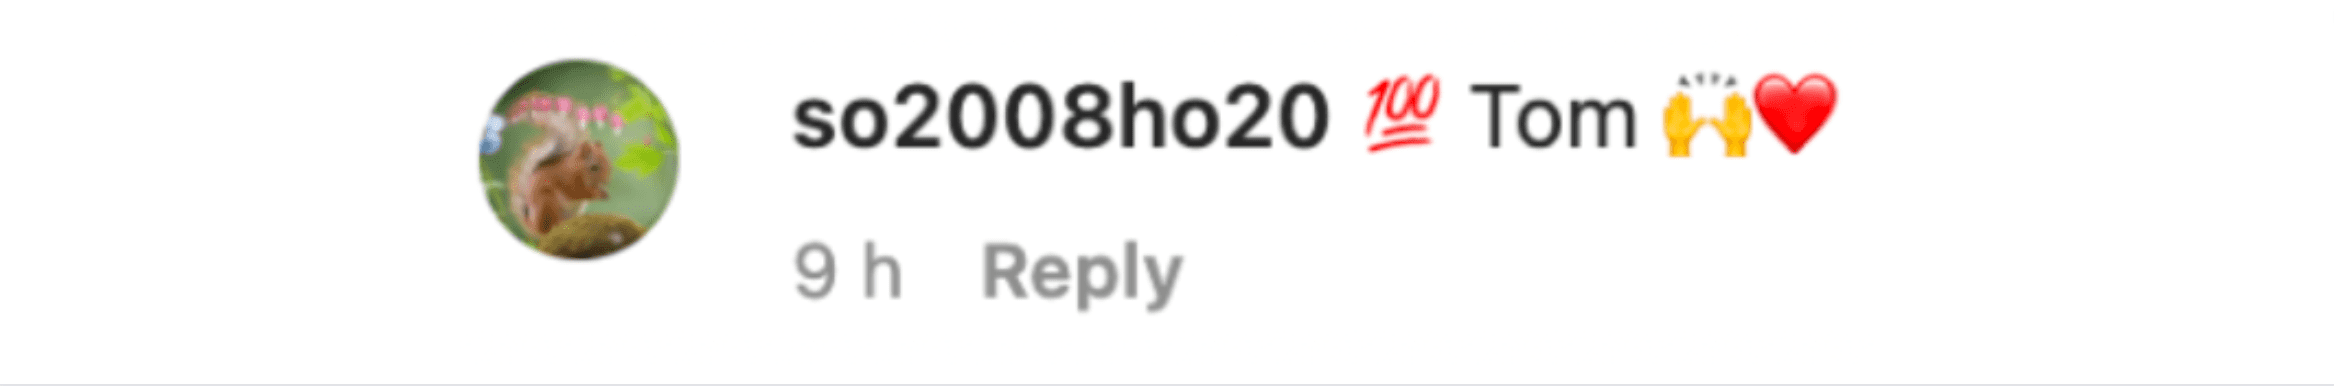 A fan's comment on Hollywood Star Kids and Hollywood Star Media Instagram posts of Suri Cruise in New York City on February 8, 2023 | Source: Instagram/hollywoodstarkids and hollywoodstarmedia